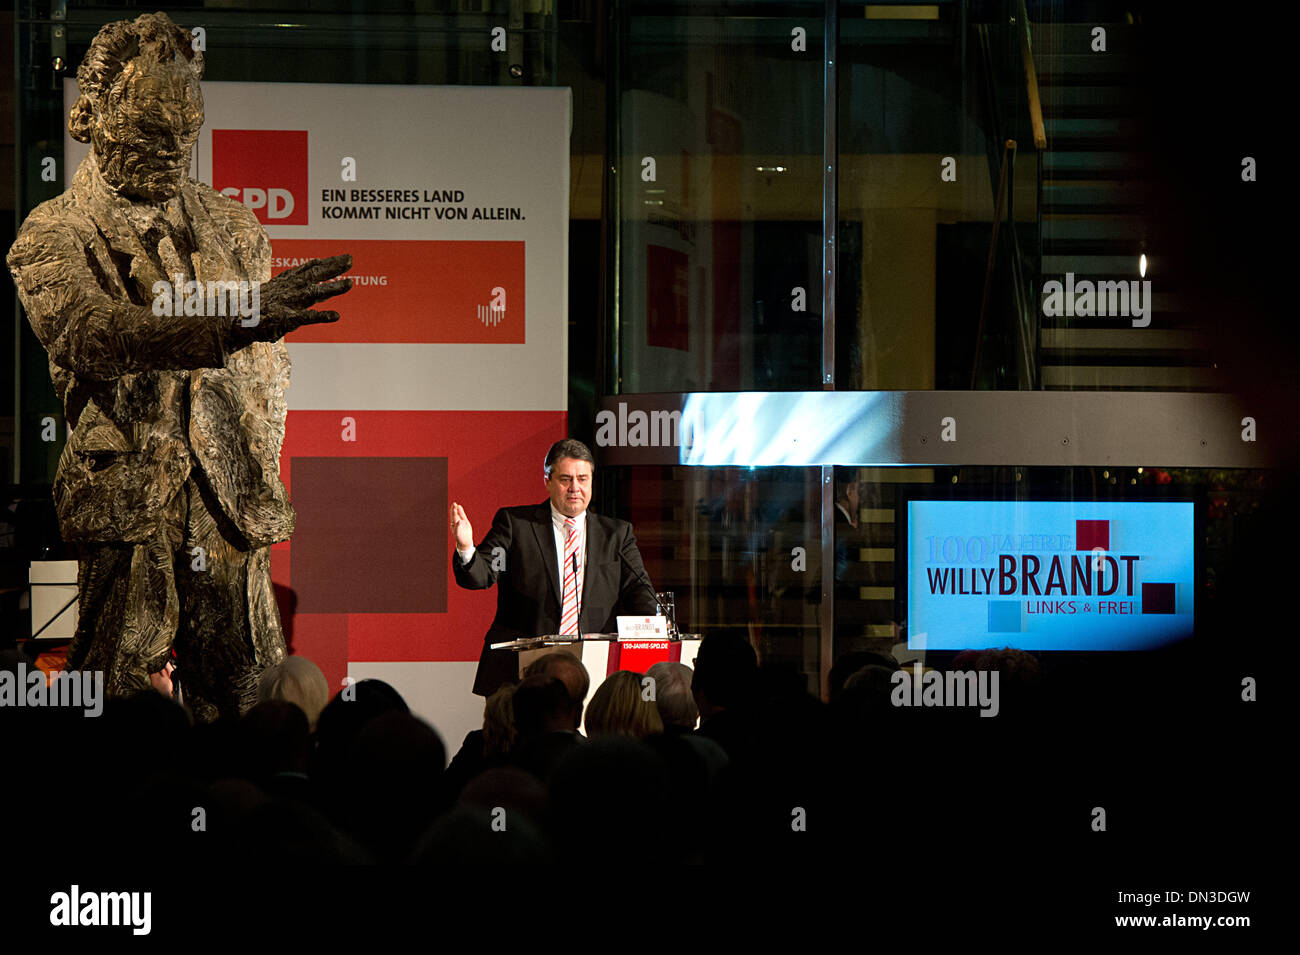 Berlin, Germany. 18th Dec, 2013. SPD chairman and Federal Minister of Economy and Energy, Sigmar Gabriel, speaks at a gala of the SPD party executive in celebration of the 100th birthday of Willy Brandt at the 'Willy-Brandt-Haus' in Berlin, Germany, 18 December 2013. The SPD politician, chancellor (1969-74) and Nobel peace laureate (1971) was born on 18 December 1913. Photo: MAURIZIO GAMBARINI/dpa/Alamy Live News Stock Photo